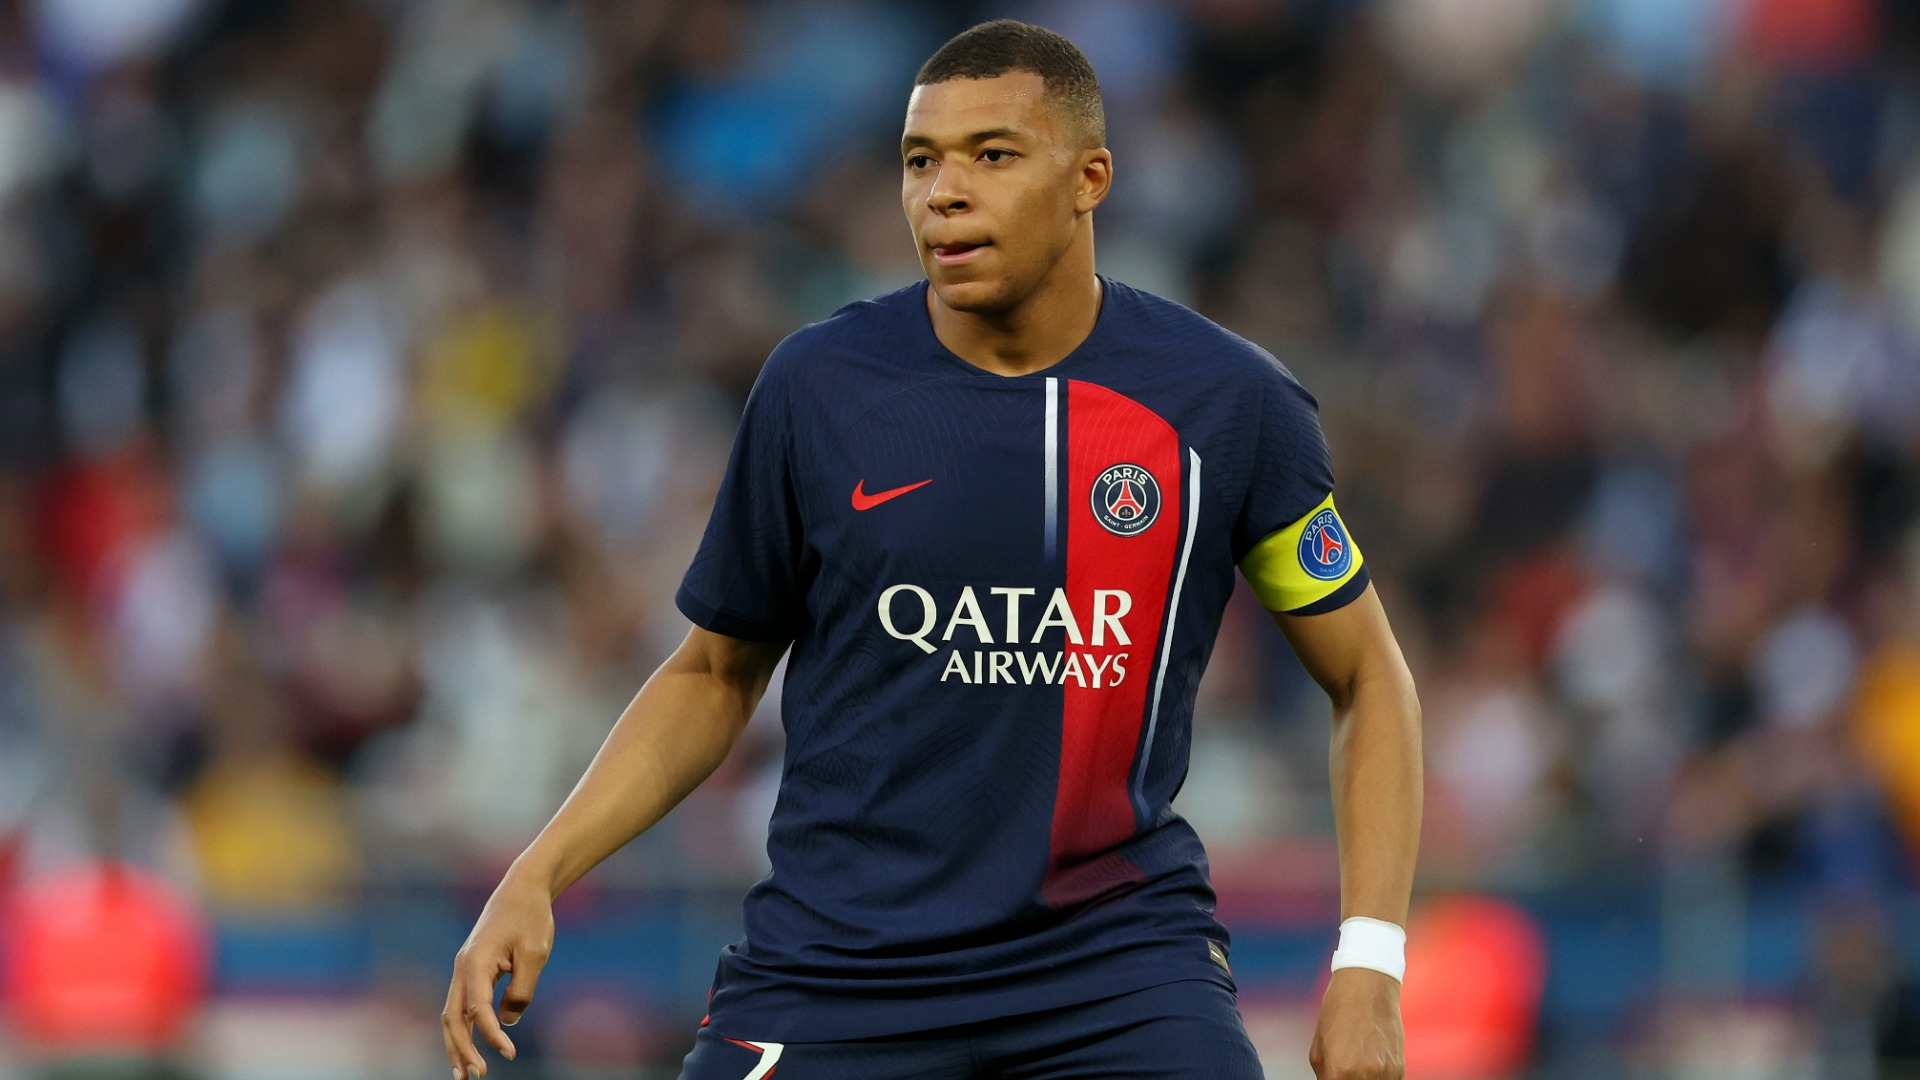 Mbappé Transfer: PSG Star to Train Seperately Amid Real Madrid Rumors